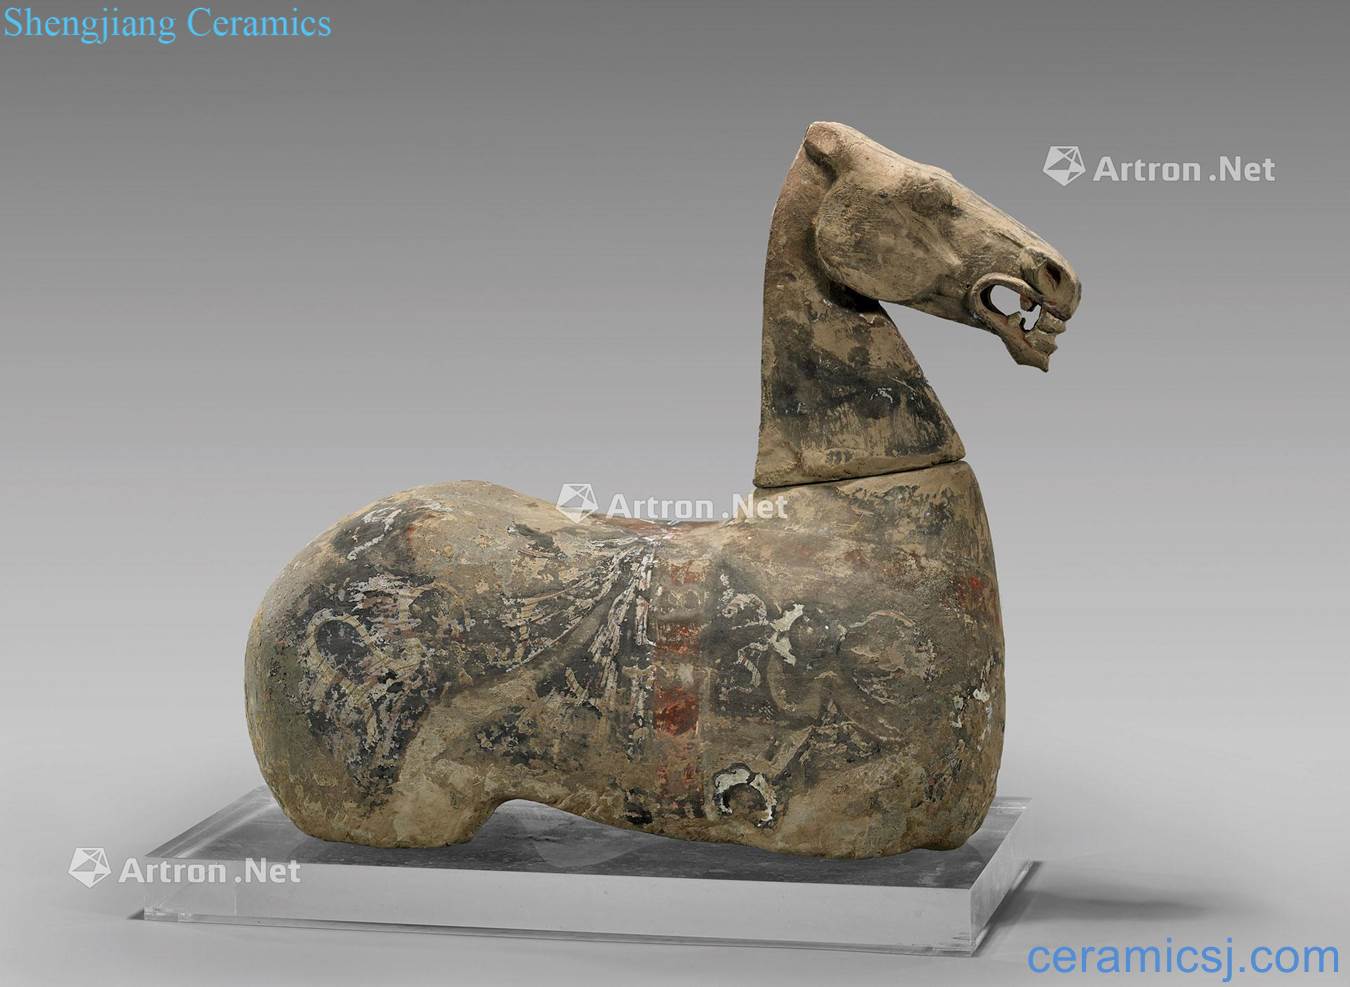 Large as the han dynasty pottery horse